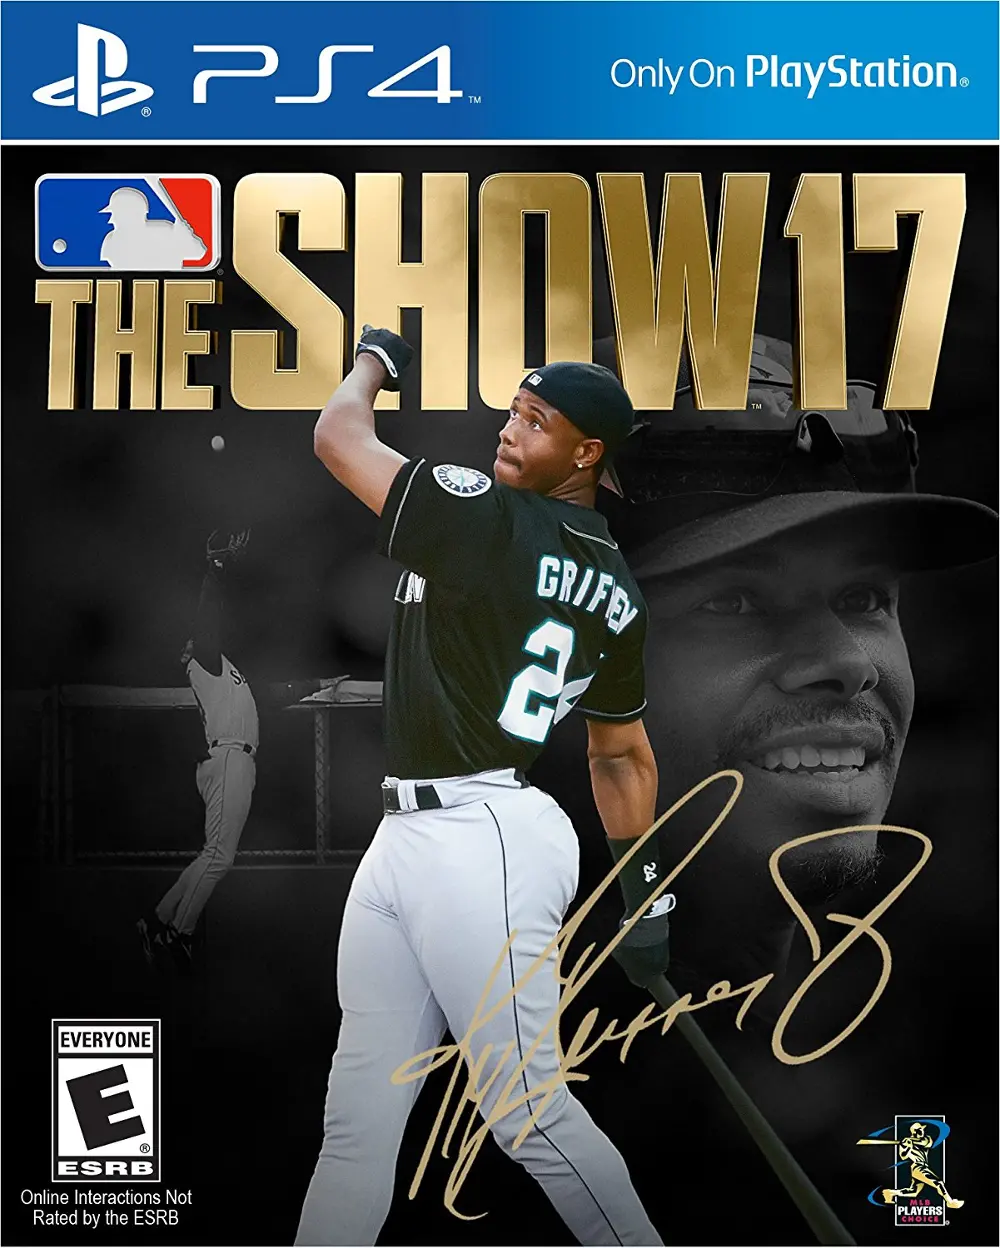 PS4 SCE 301568 MLB The Show 17 Standard Edition - PS4-1